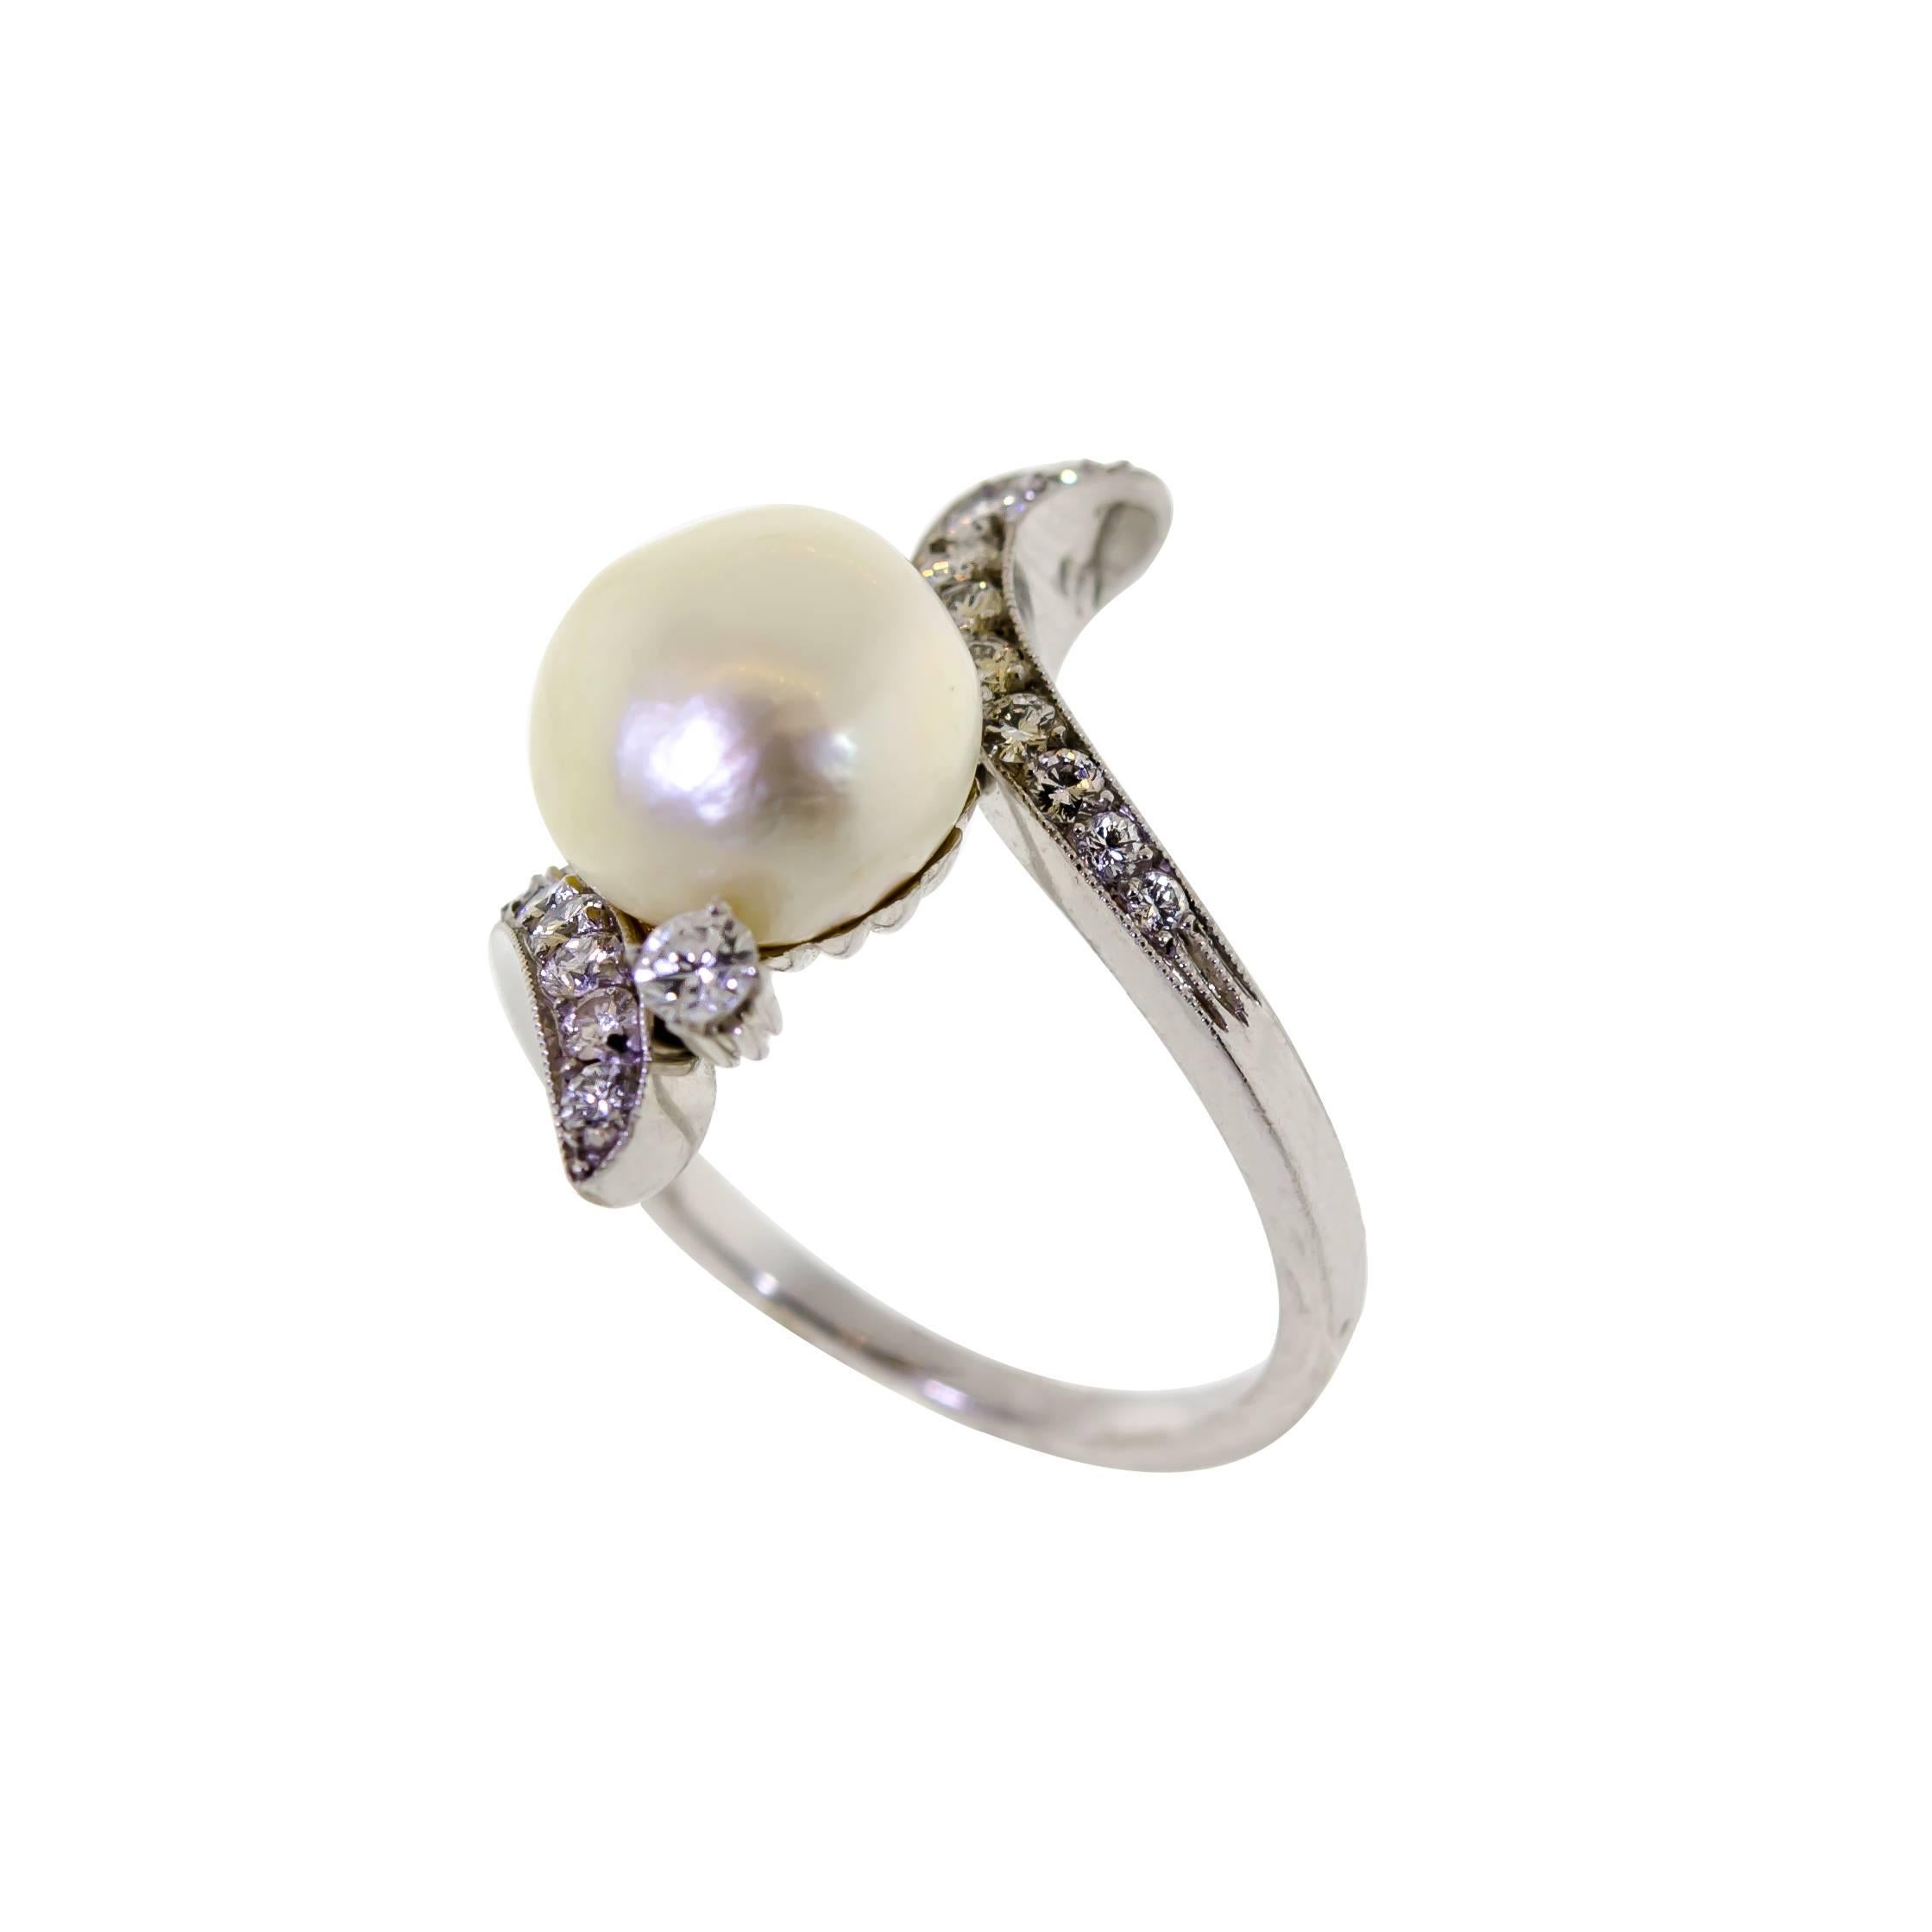 Vintage platinum cultured pearl and diamond ring Set with numerous round brilliant cut diamonds. Total weight approximately .40 cts. Pearl approximately 10mm. Excellent condition.

Ring is currently size 6 plus but can be resized. 